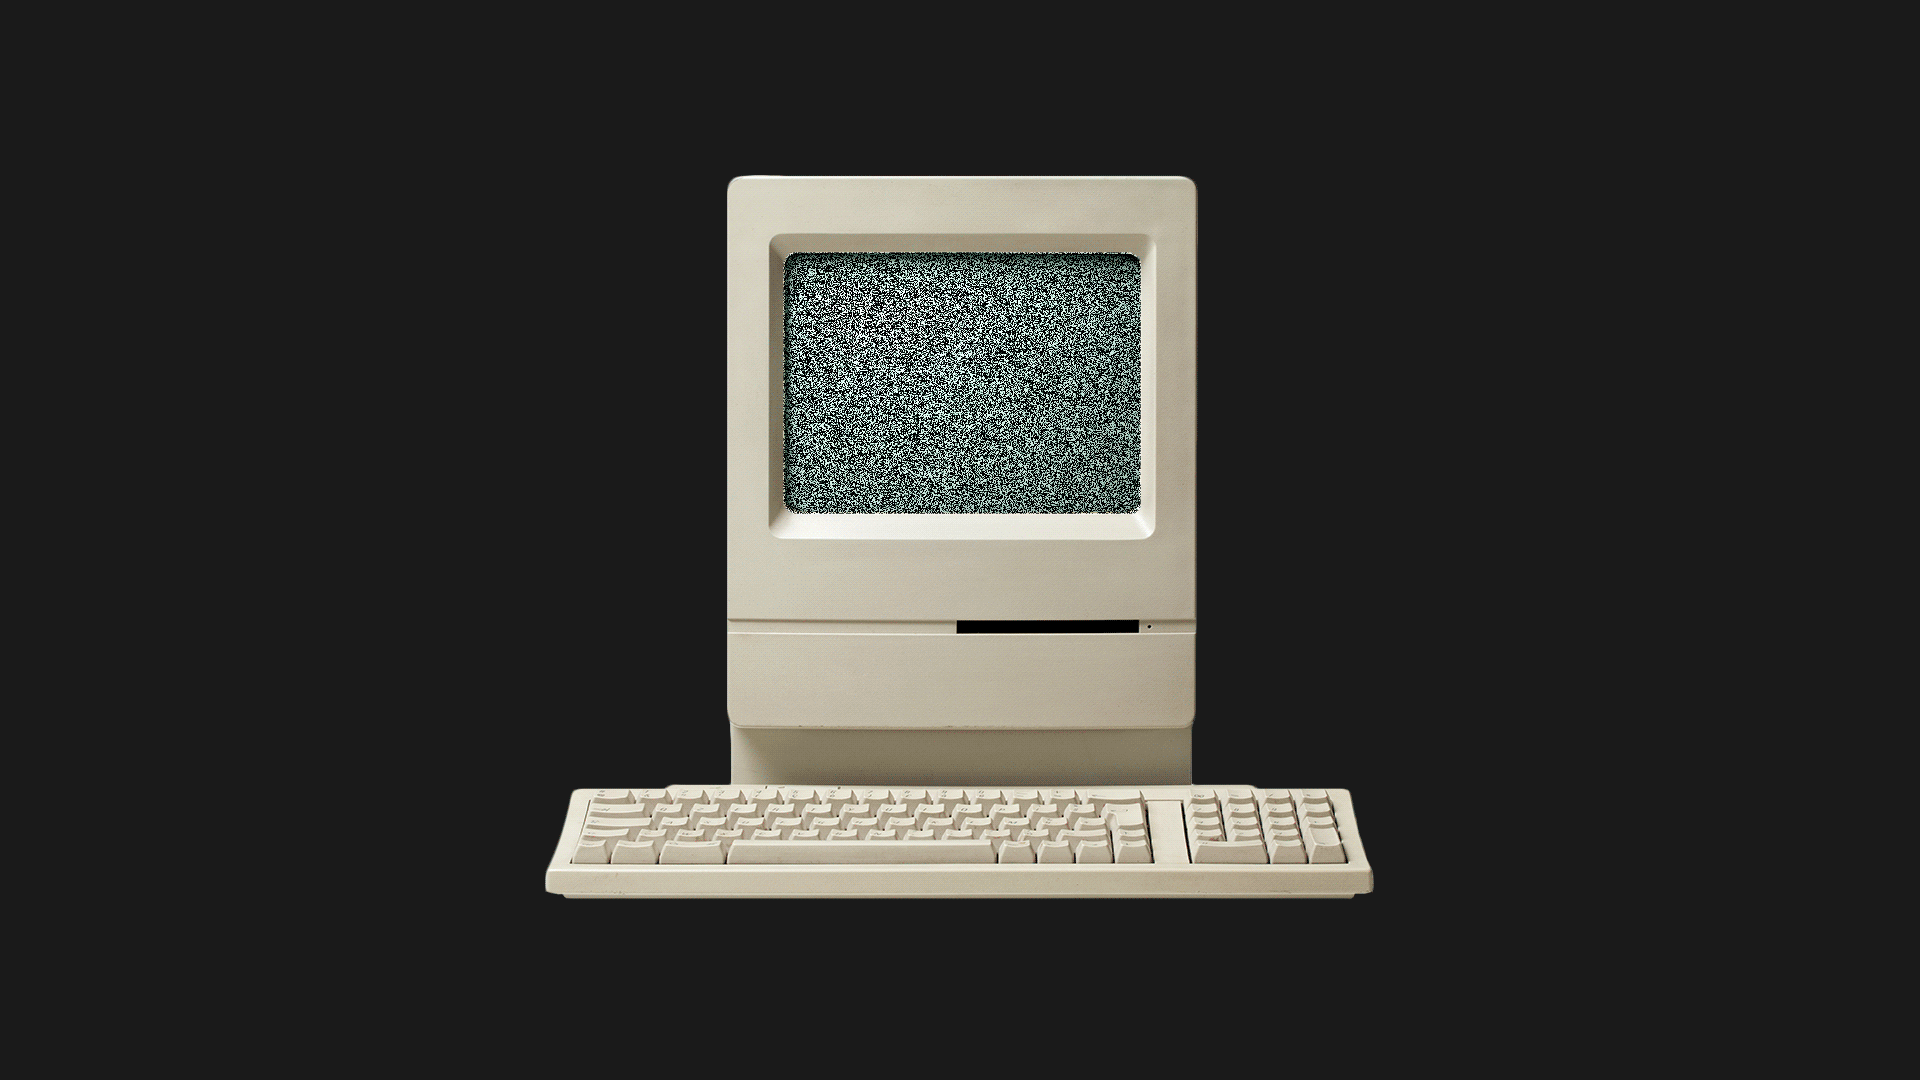 Illustration of an old-school Mac with a flashing "no vaccination" sign